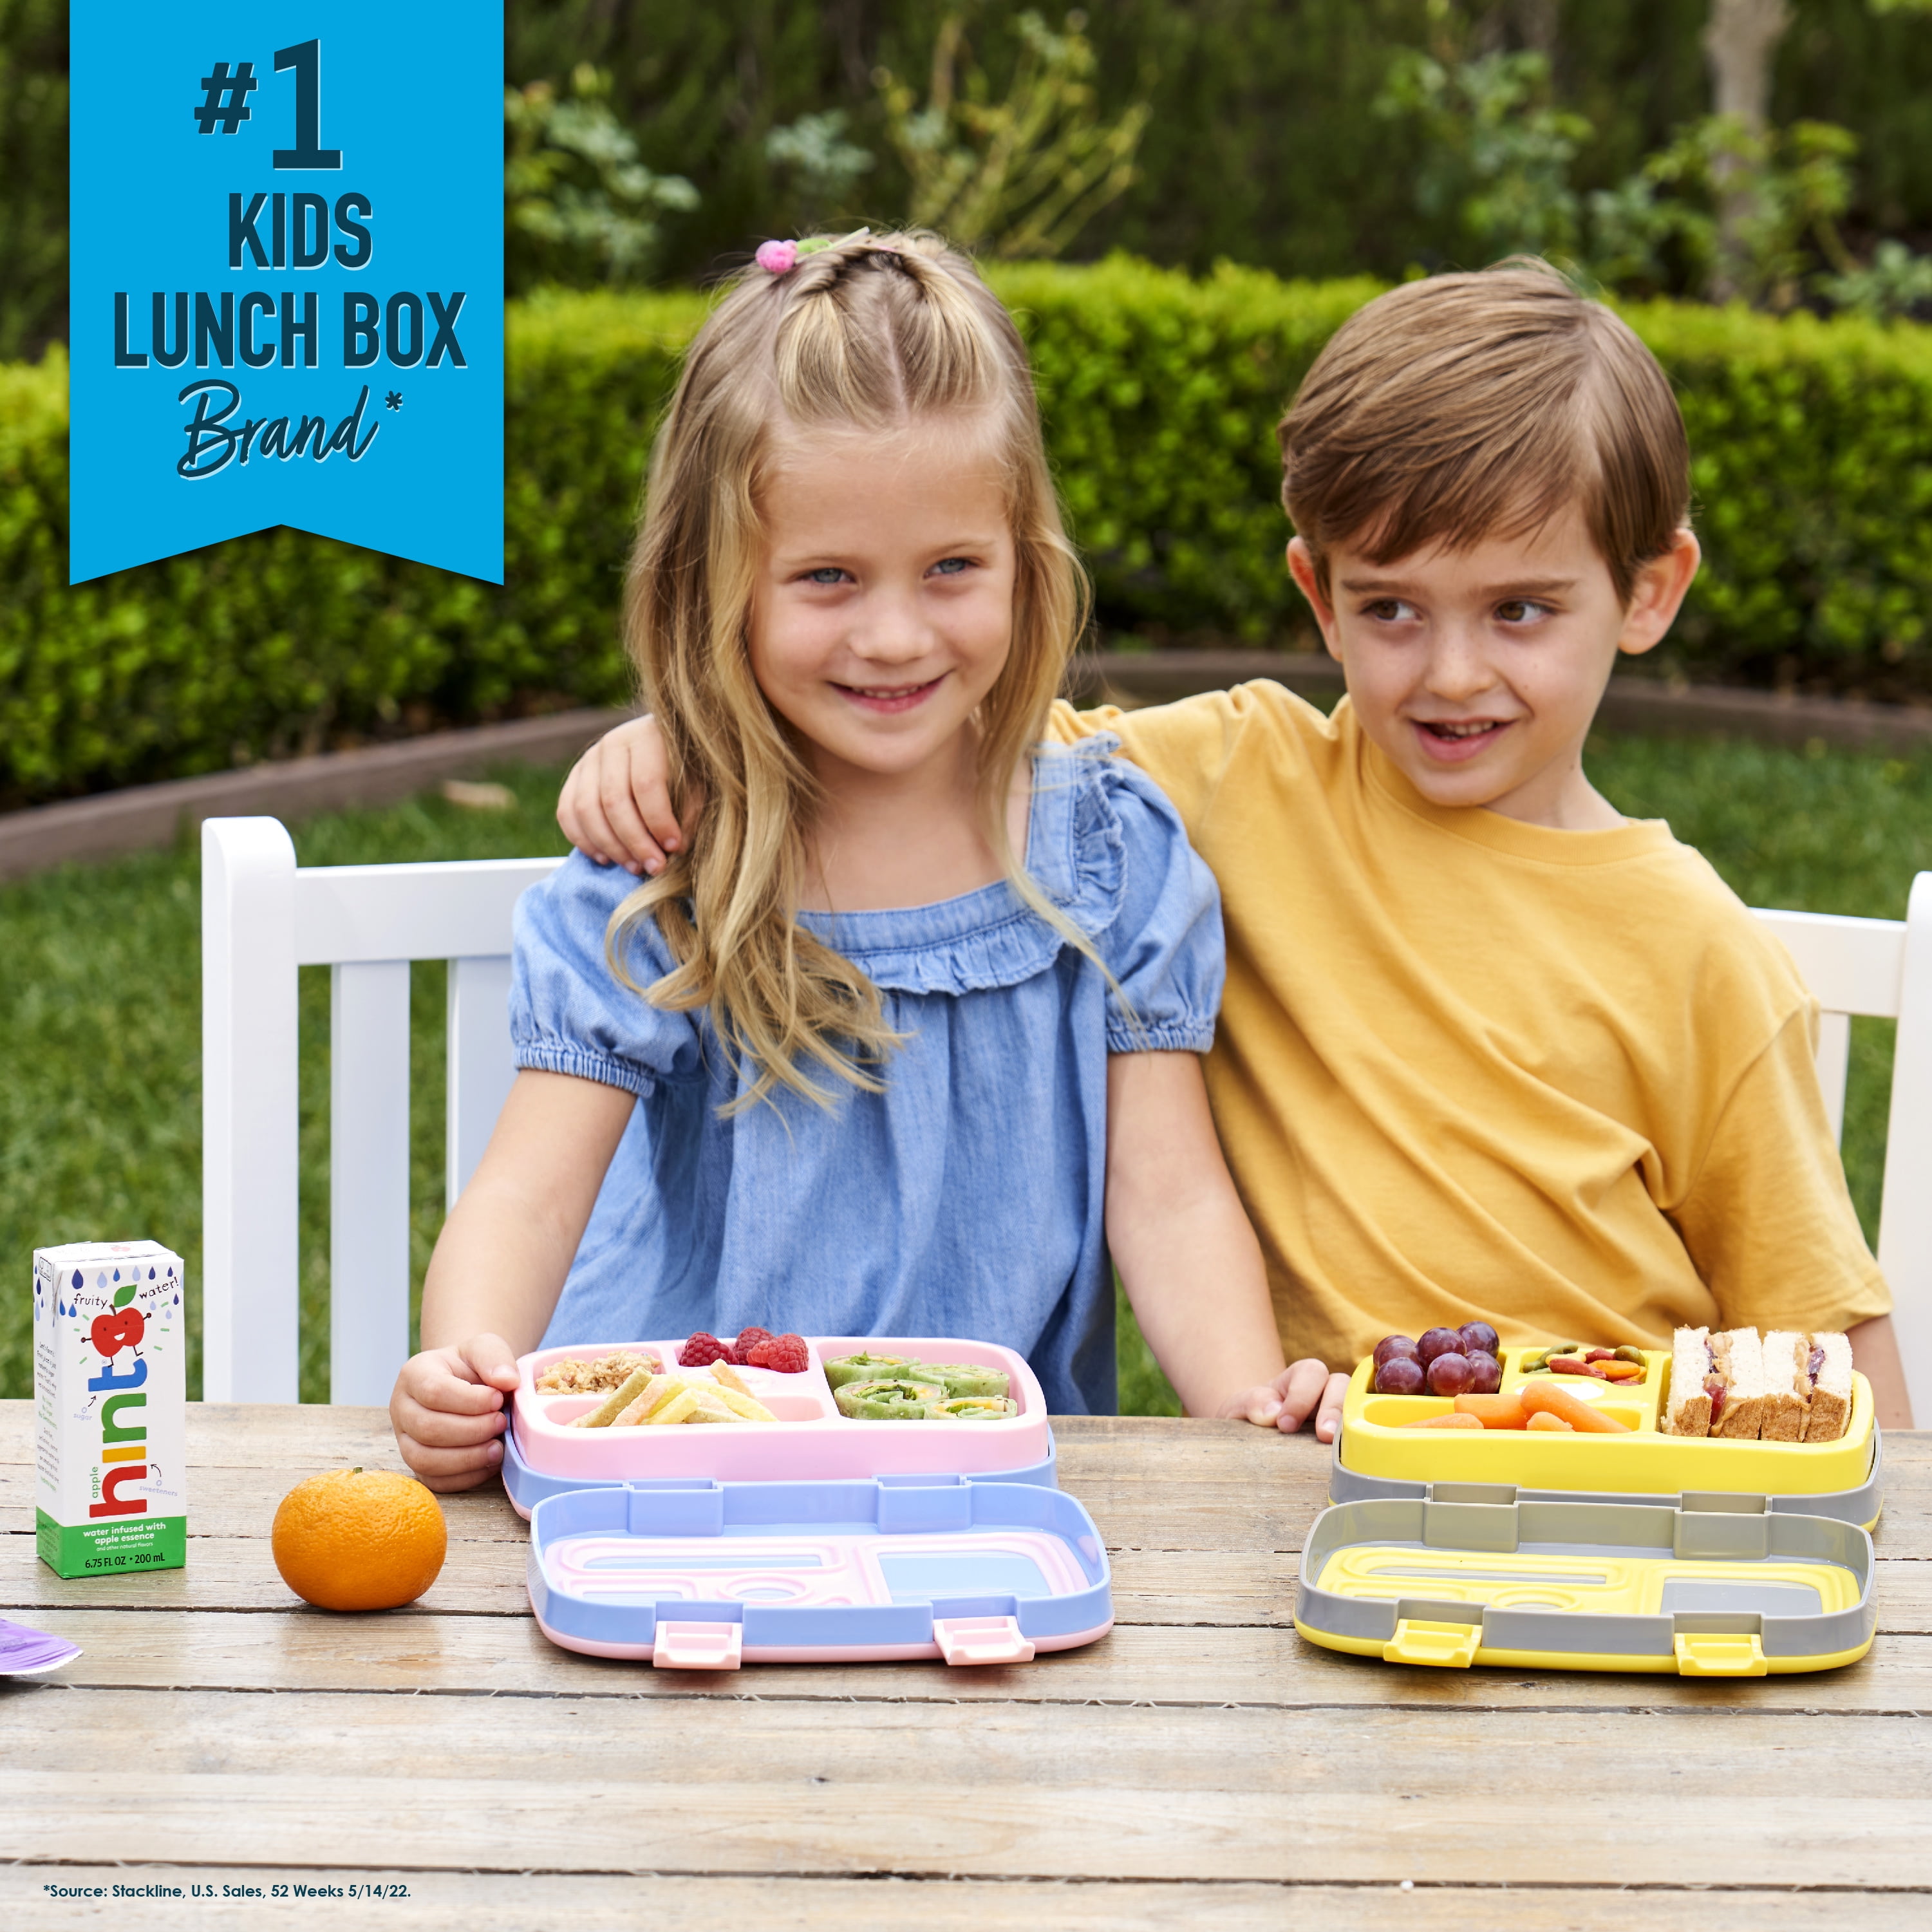 Bentgo Pop Leakproof Bento-Style Lunch Box with Removable Divider-3.4 Cup -  Bright Coral/Teal